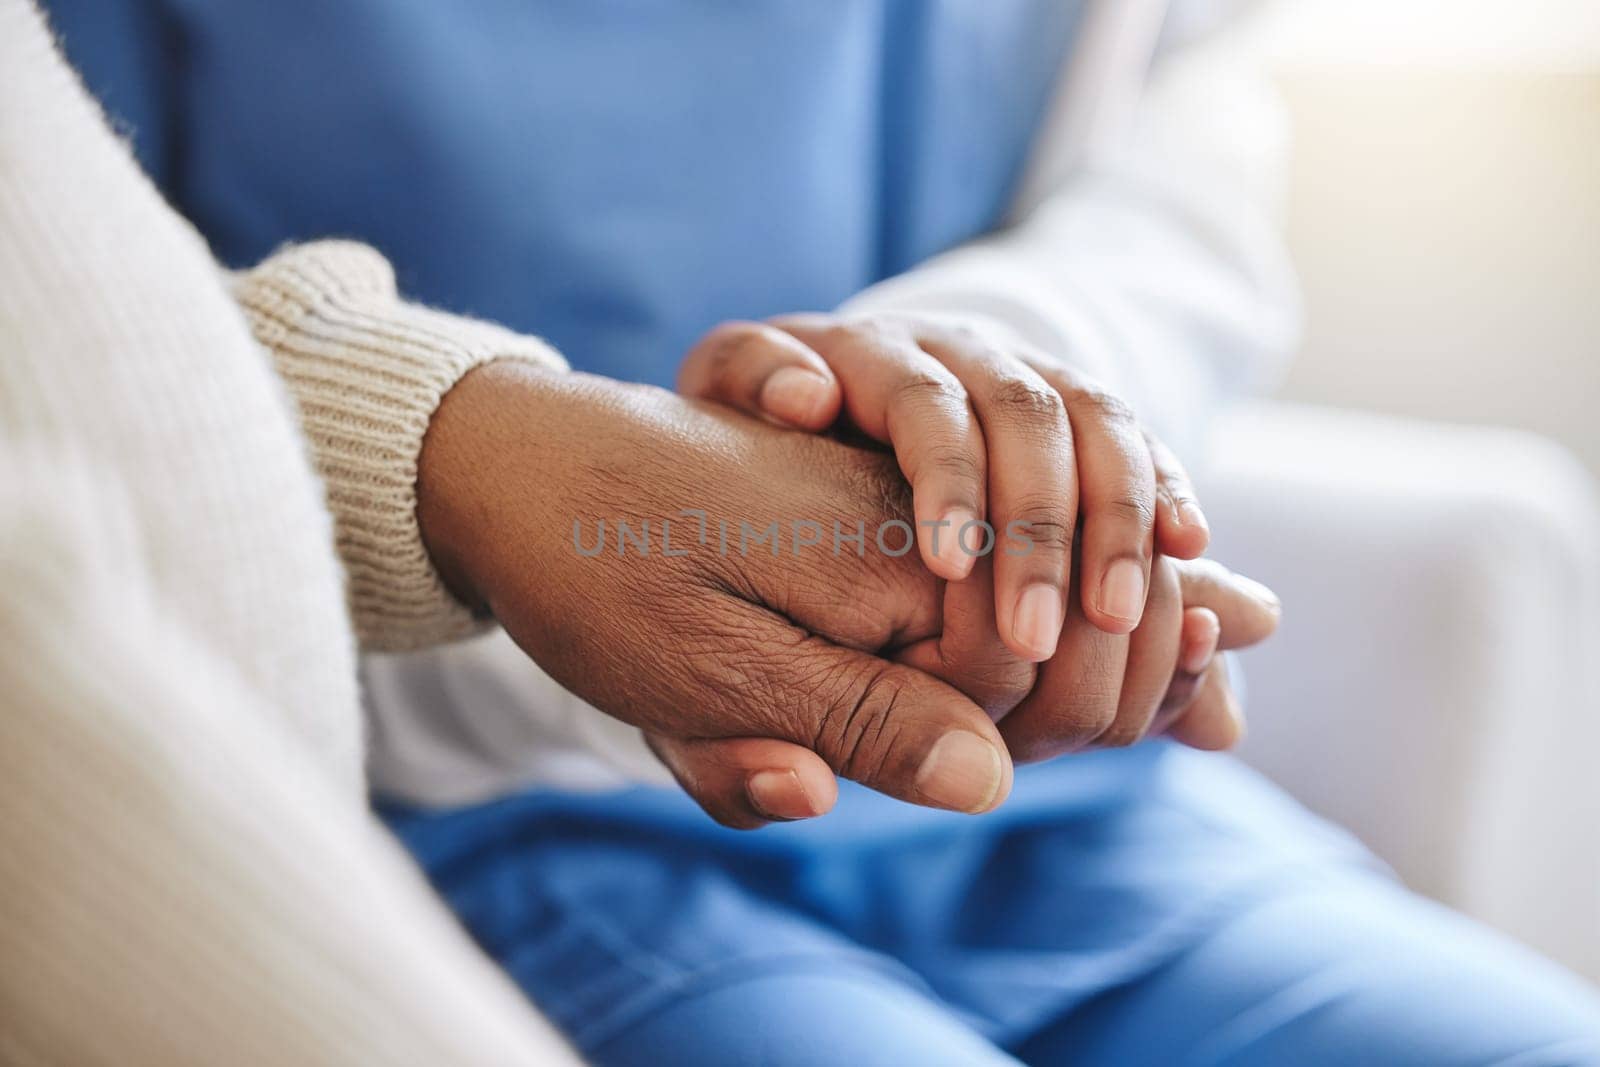 Senior patient, nurse and holding hands for support, healthcare or empathy at nursing home. Elderly person and caregiver together for trust, homecare and counseling or help for health in retirement.